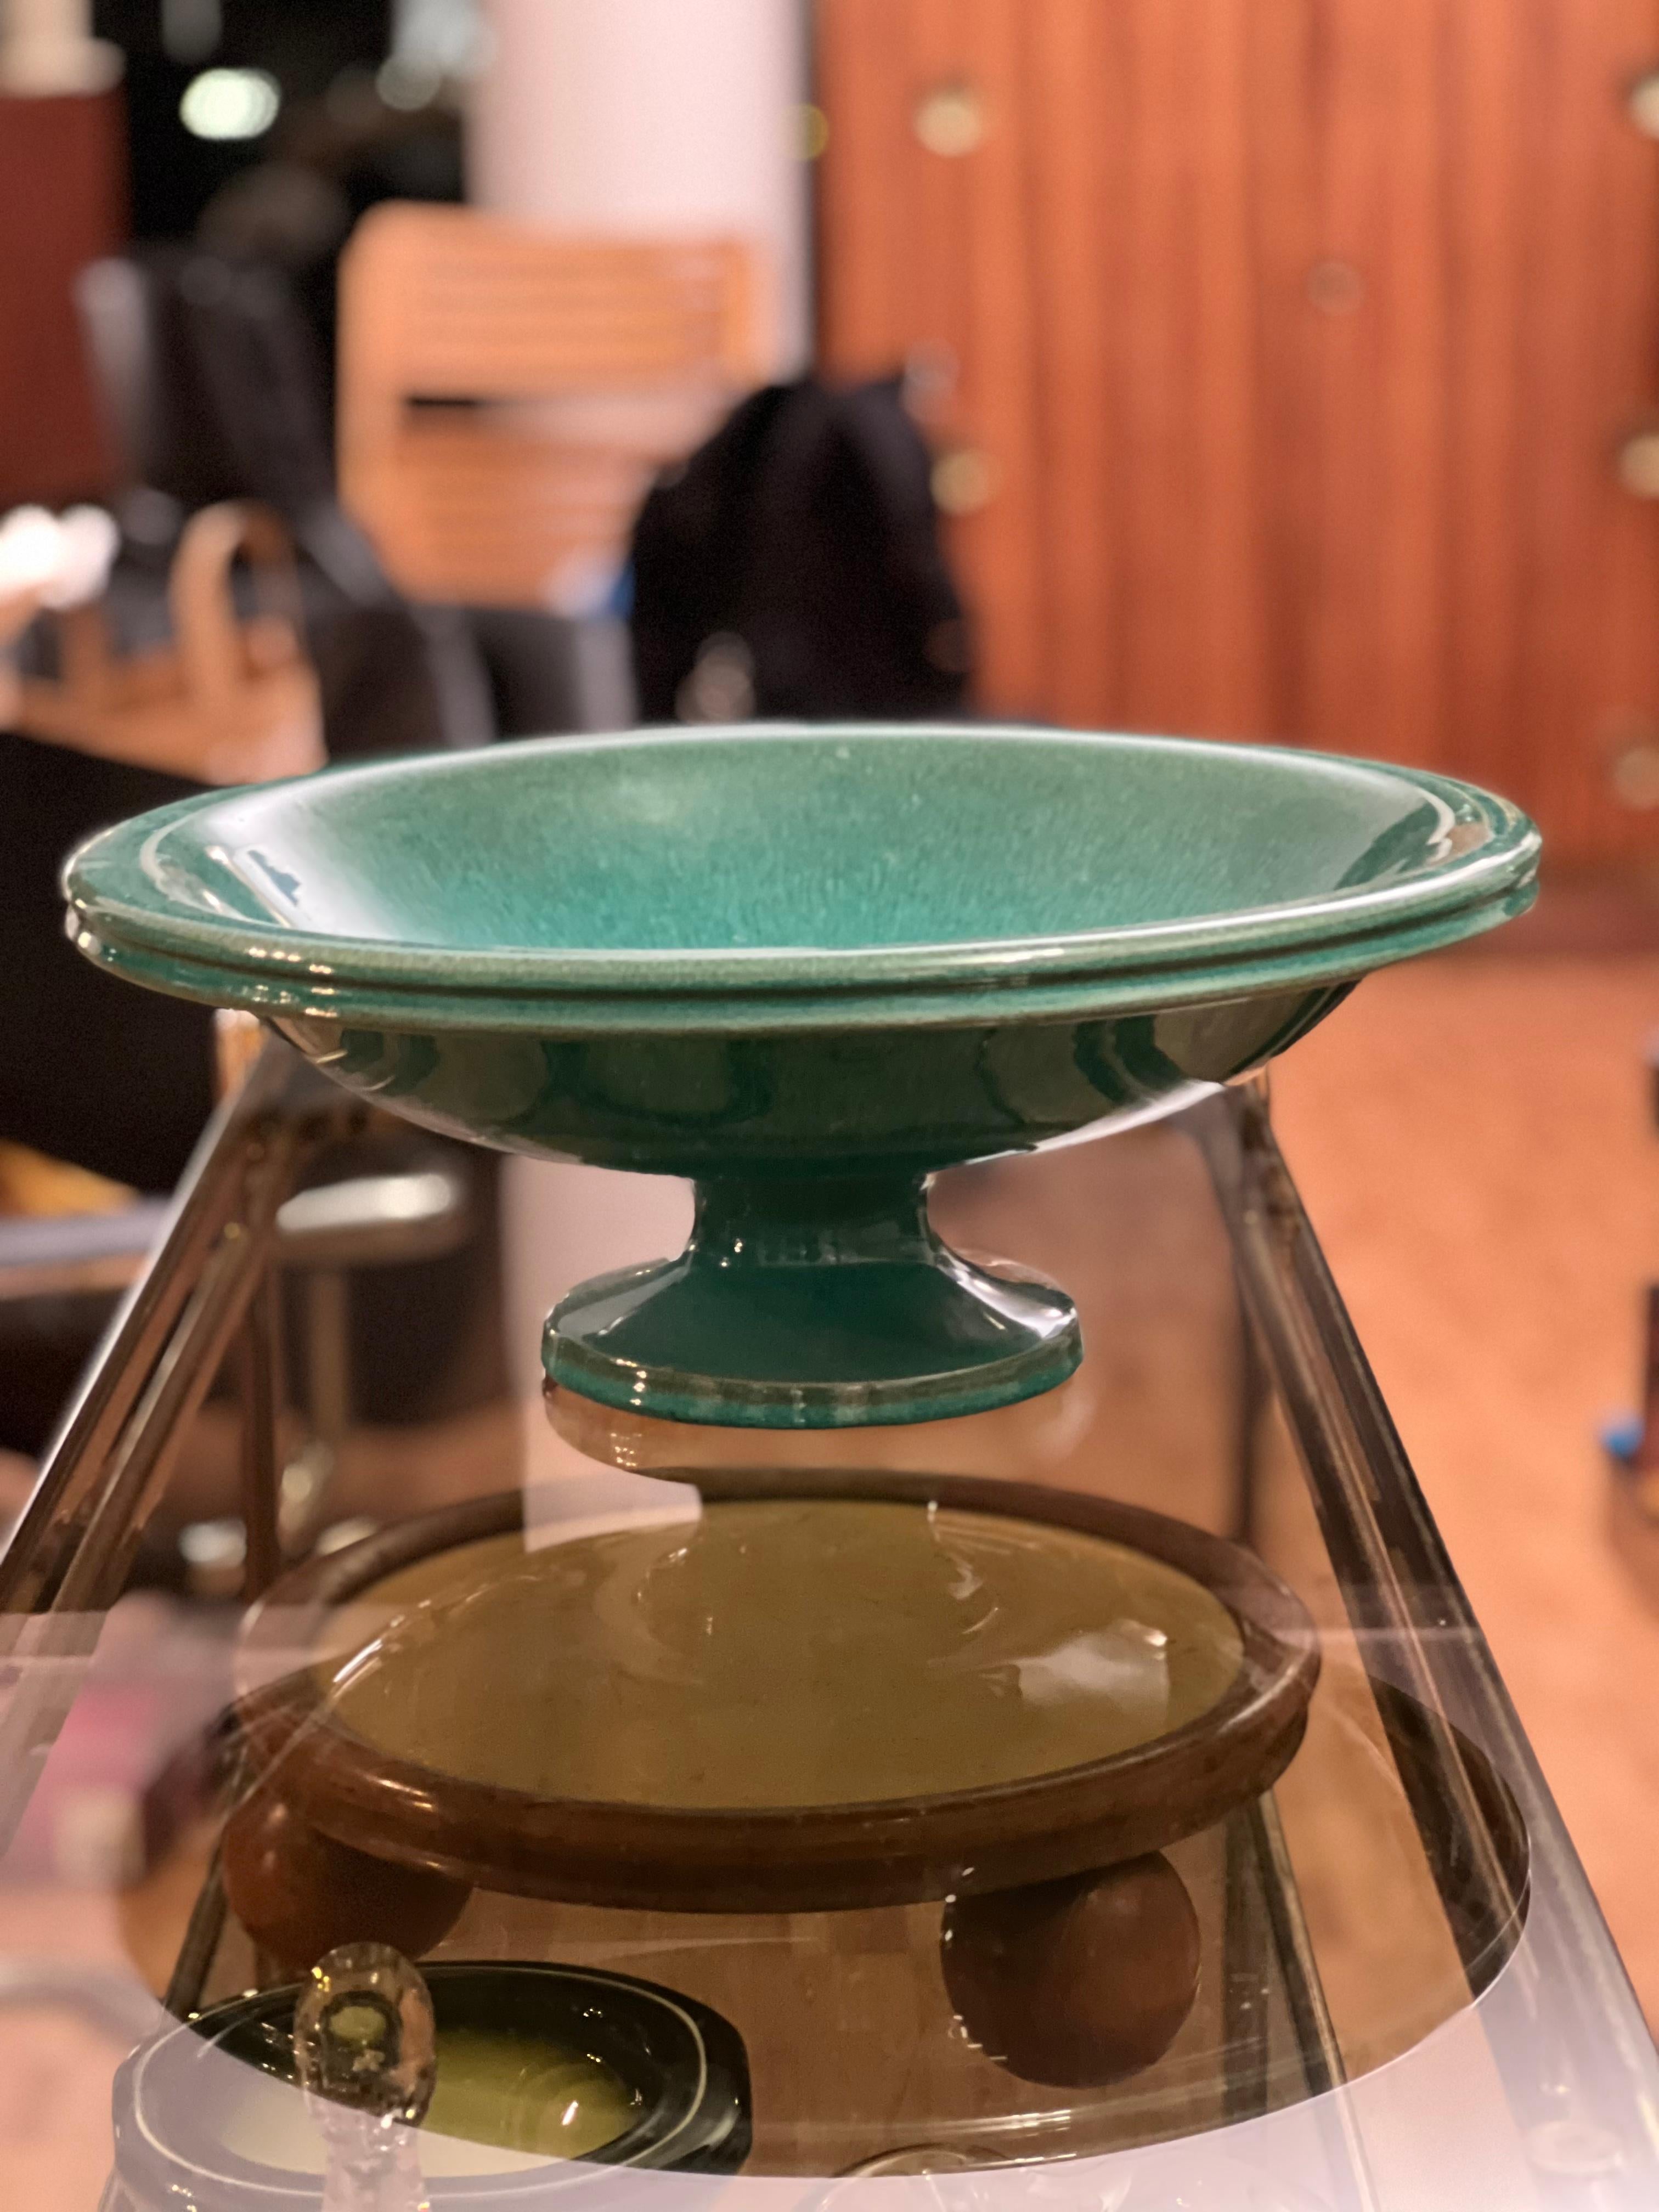 Amazing dark green glazed Majolica European Mid-Century centrepiece. Beautifully formed bowl, uplifted on a classic shaped base. Would look lovely on any table.